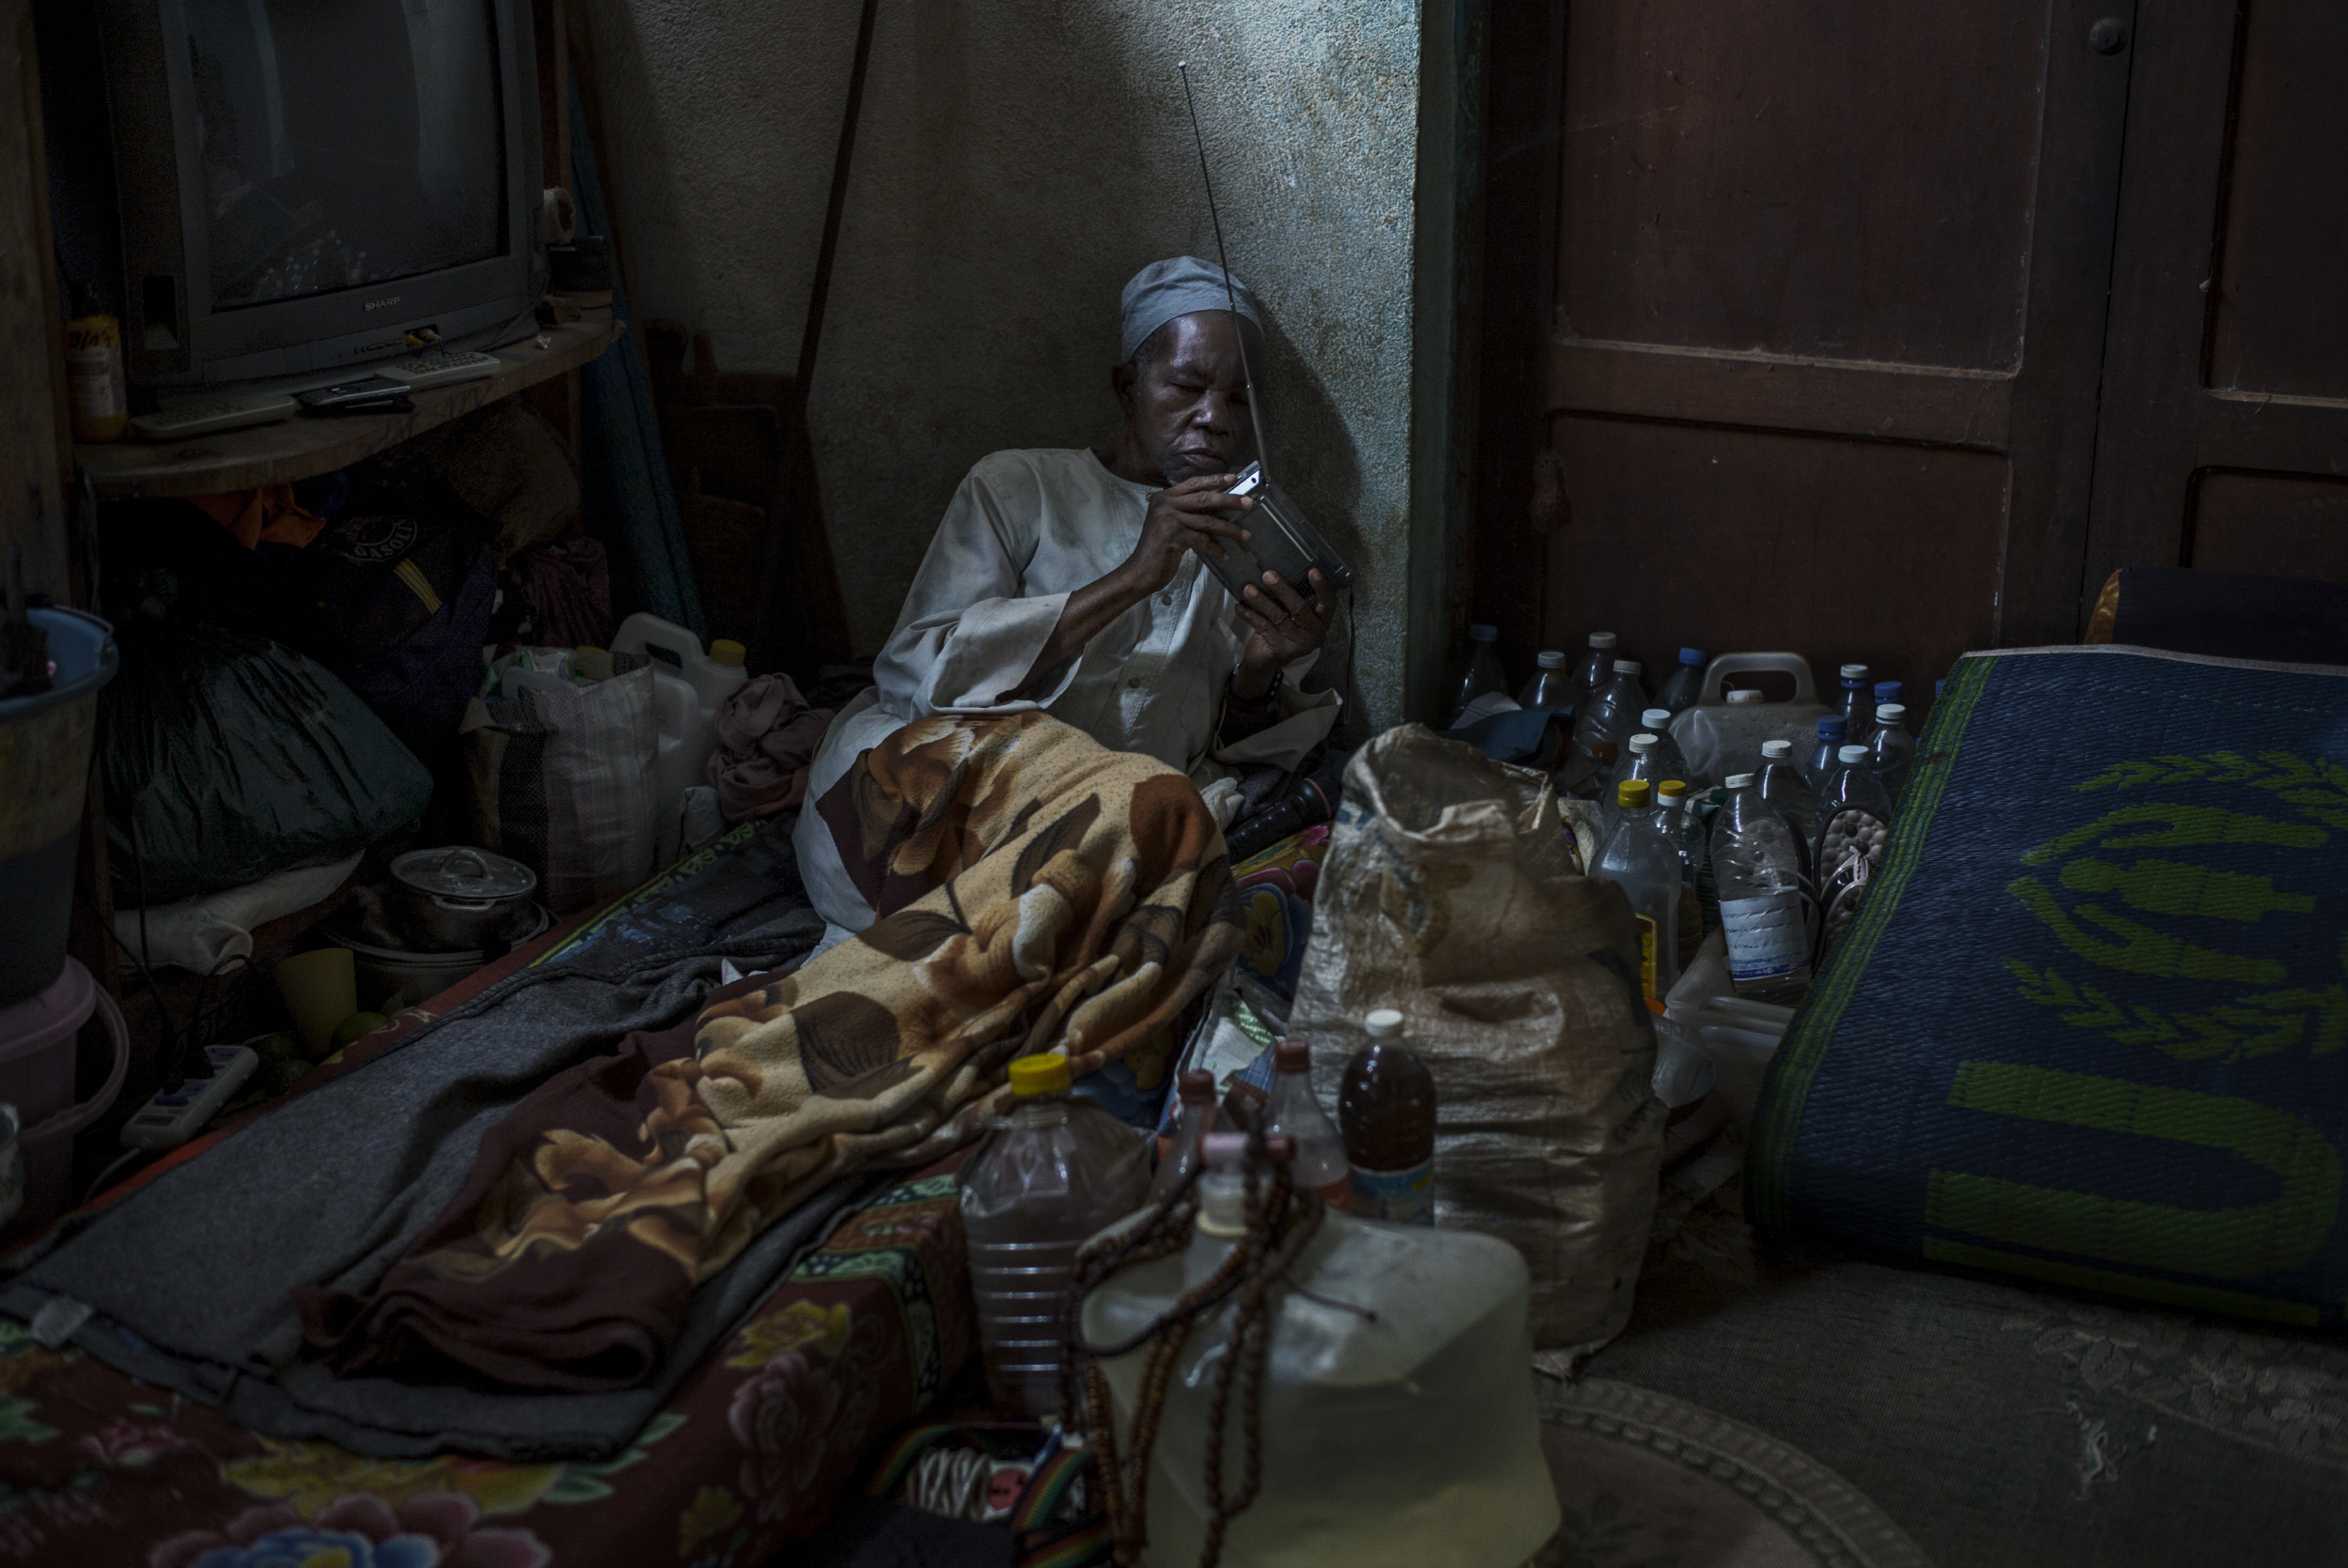 A man listens to his radio in a building situated in the compound of the church of Carnot, Central African Republic, Oct. 18, 2015. About 500 muslims have been living there for 22 months with little access to food and health care.